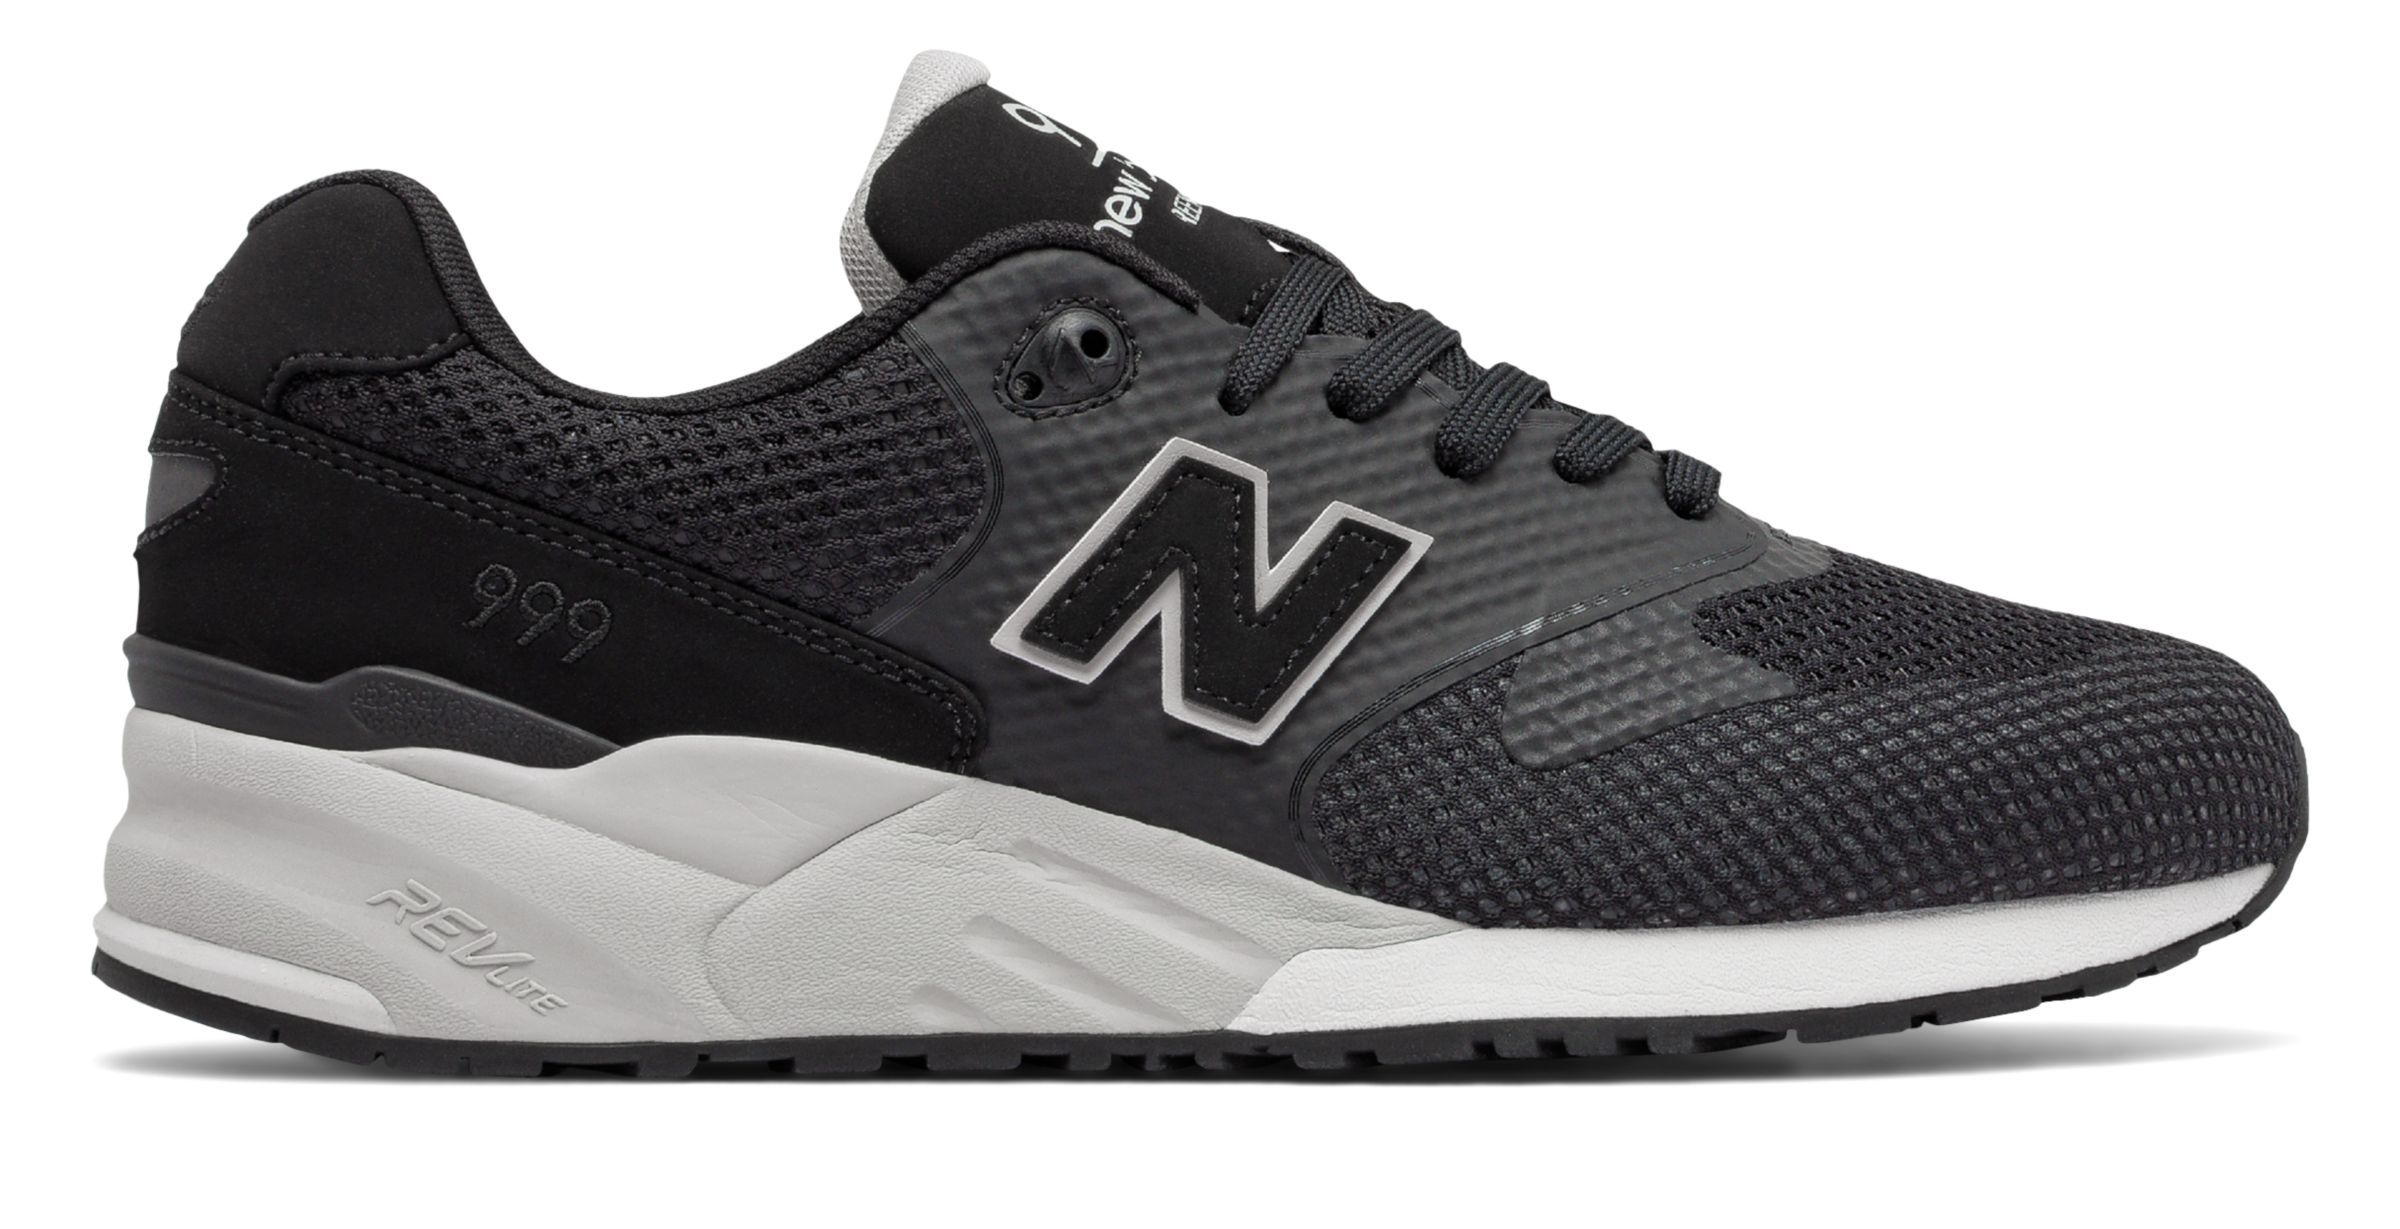 New Balance MRL999-SYM on Sale - Discounts Up to 20% Off on MRL999CD at  Joe's New Balance Outlet